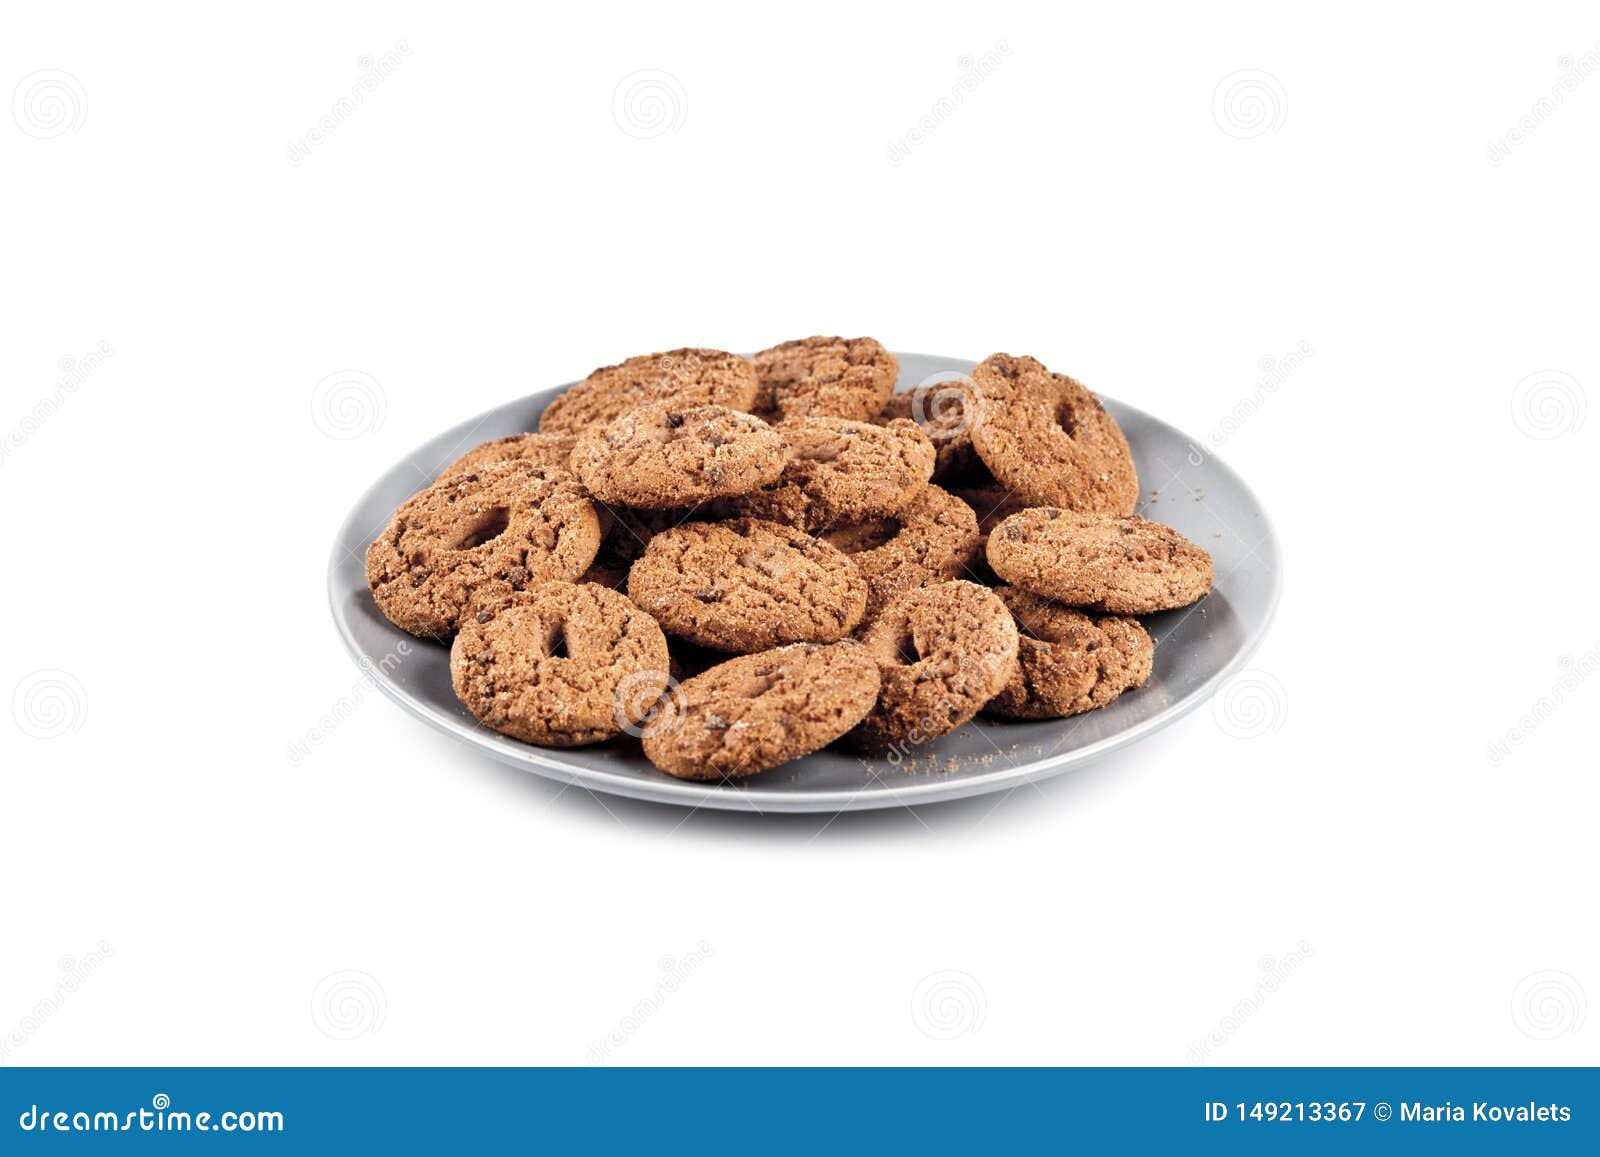 Fresh Baked Chocolate Chip Cookies Heap On Grey Plate Isolated On White